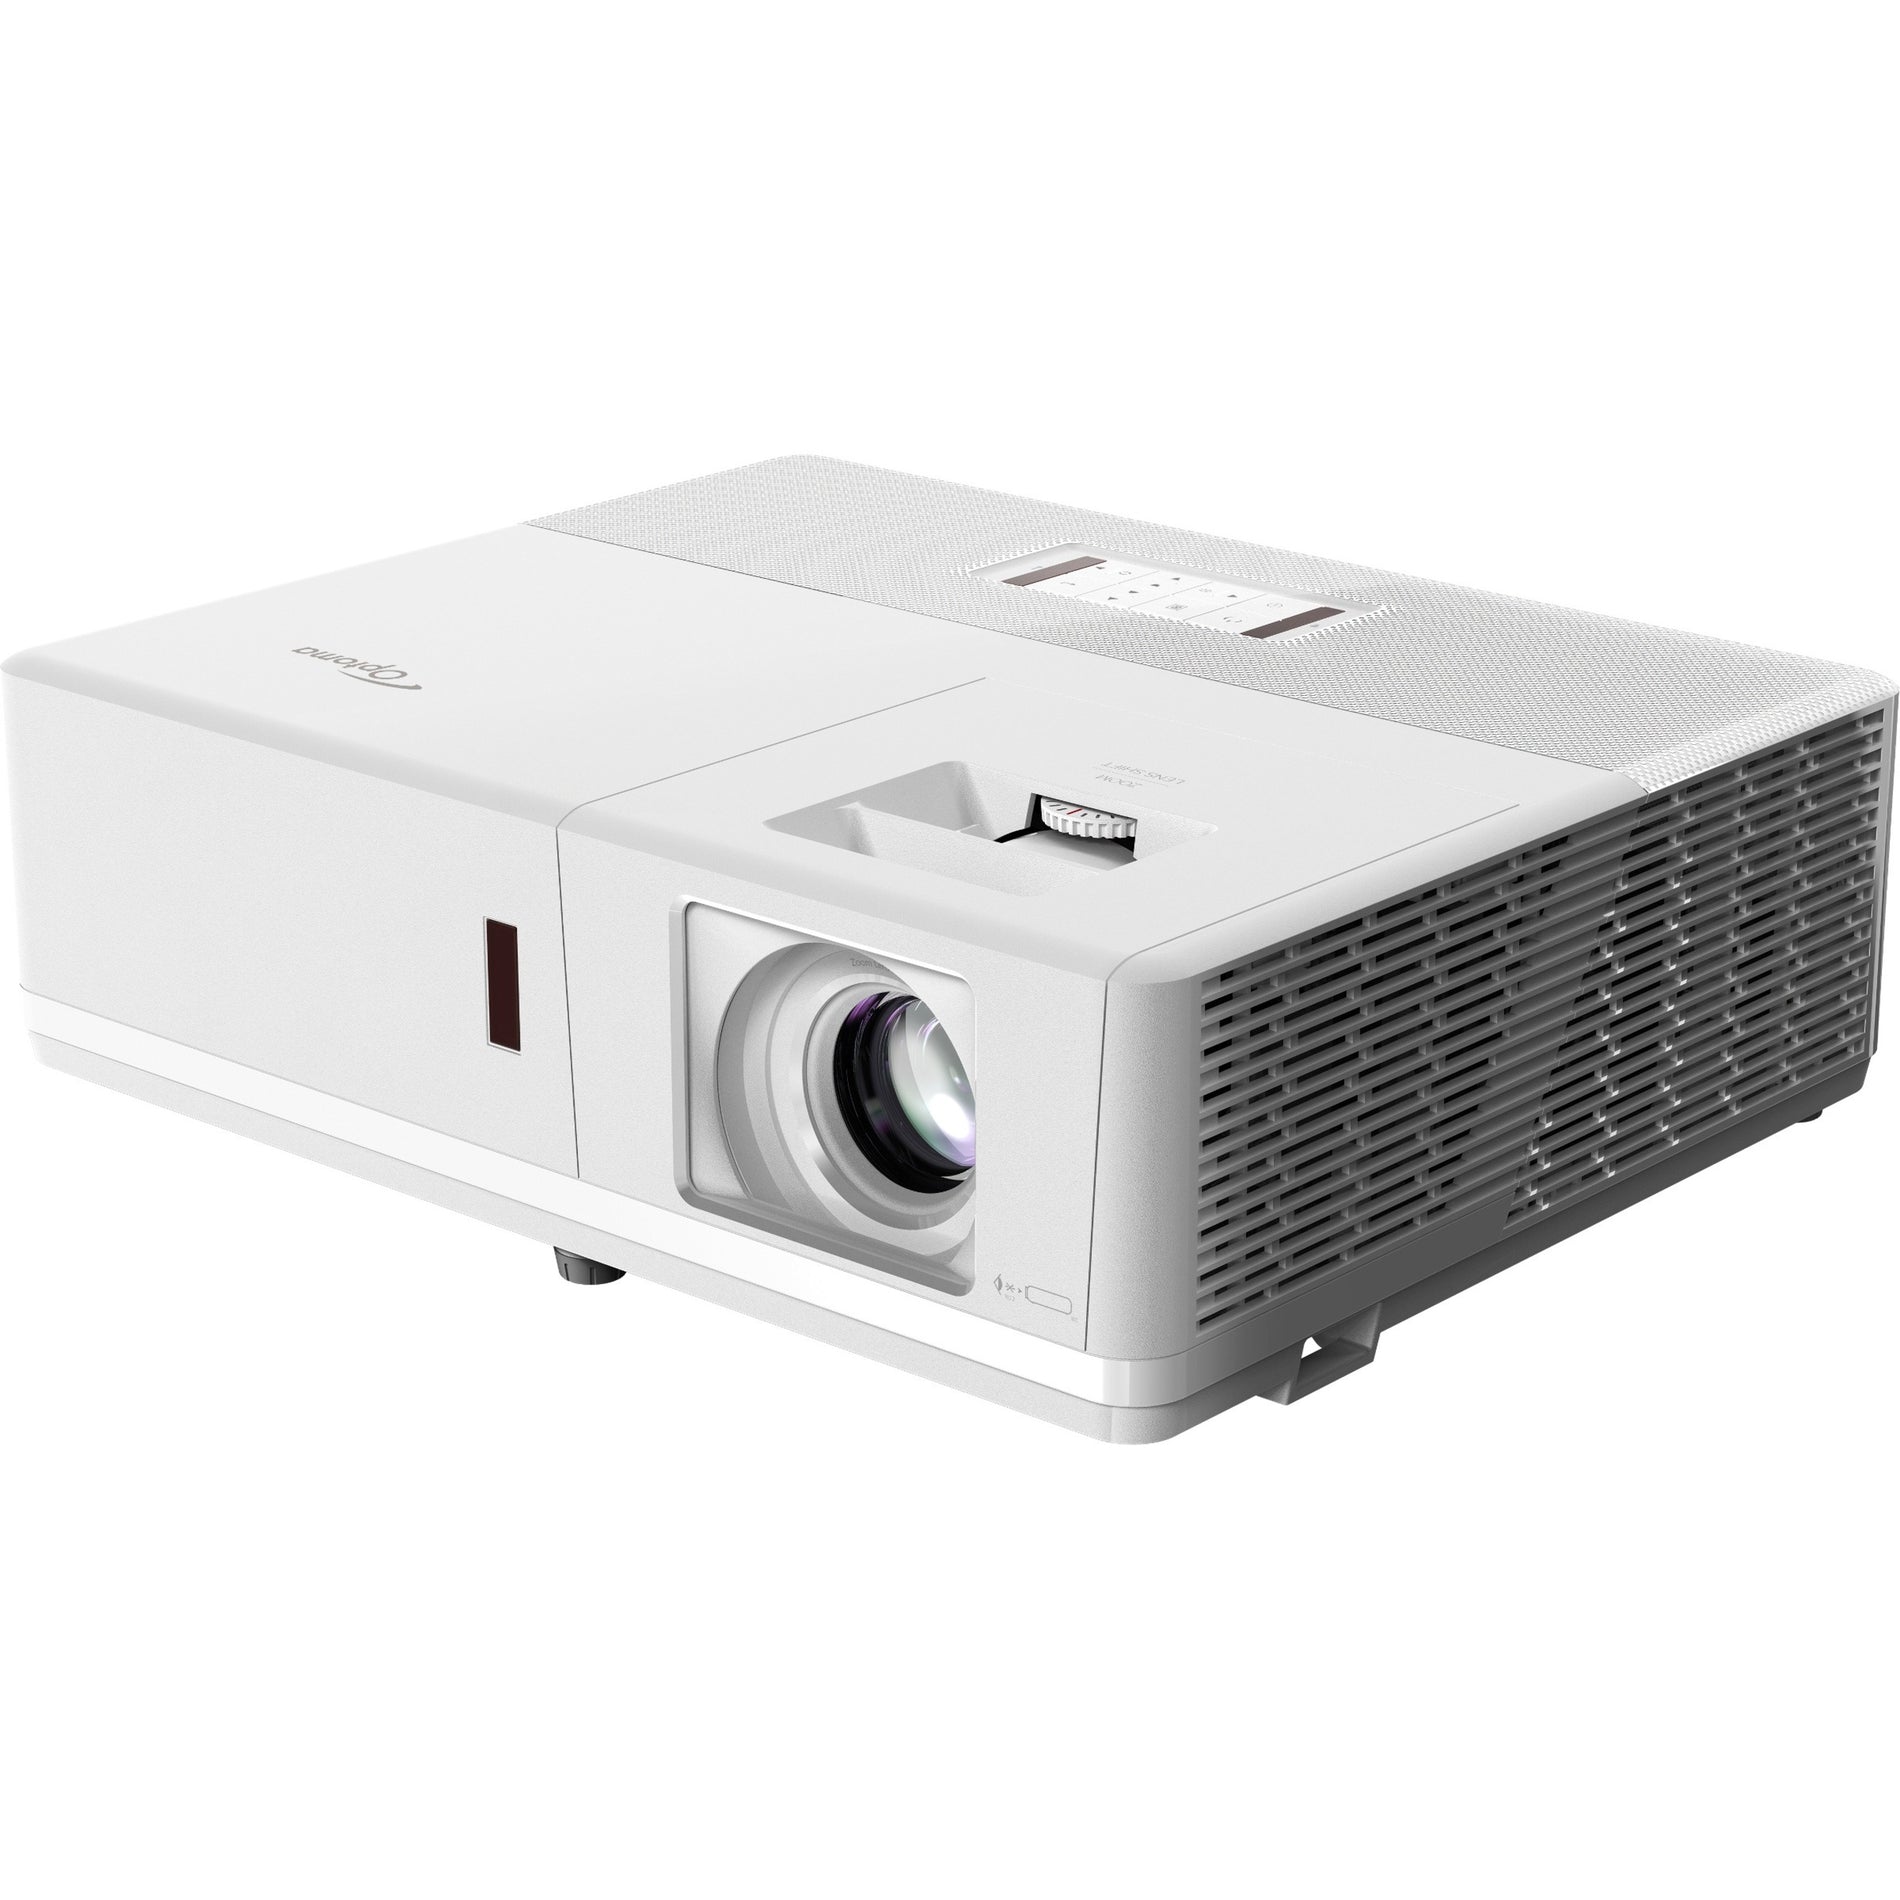 Optoma ZU506T-W WUXGA Professional Installation Laser Projector, 5000 lm, 3D Ready, 20,000 Hour Lamp Life [Discontinued]